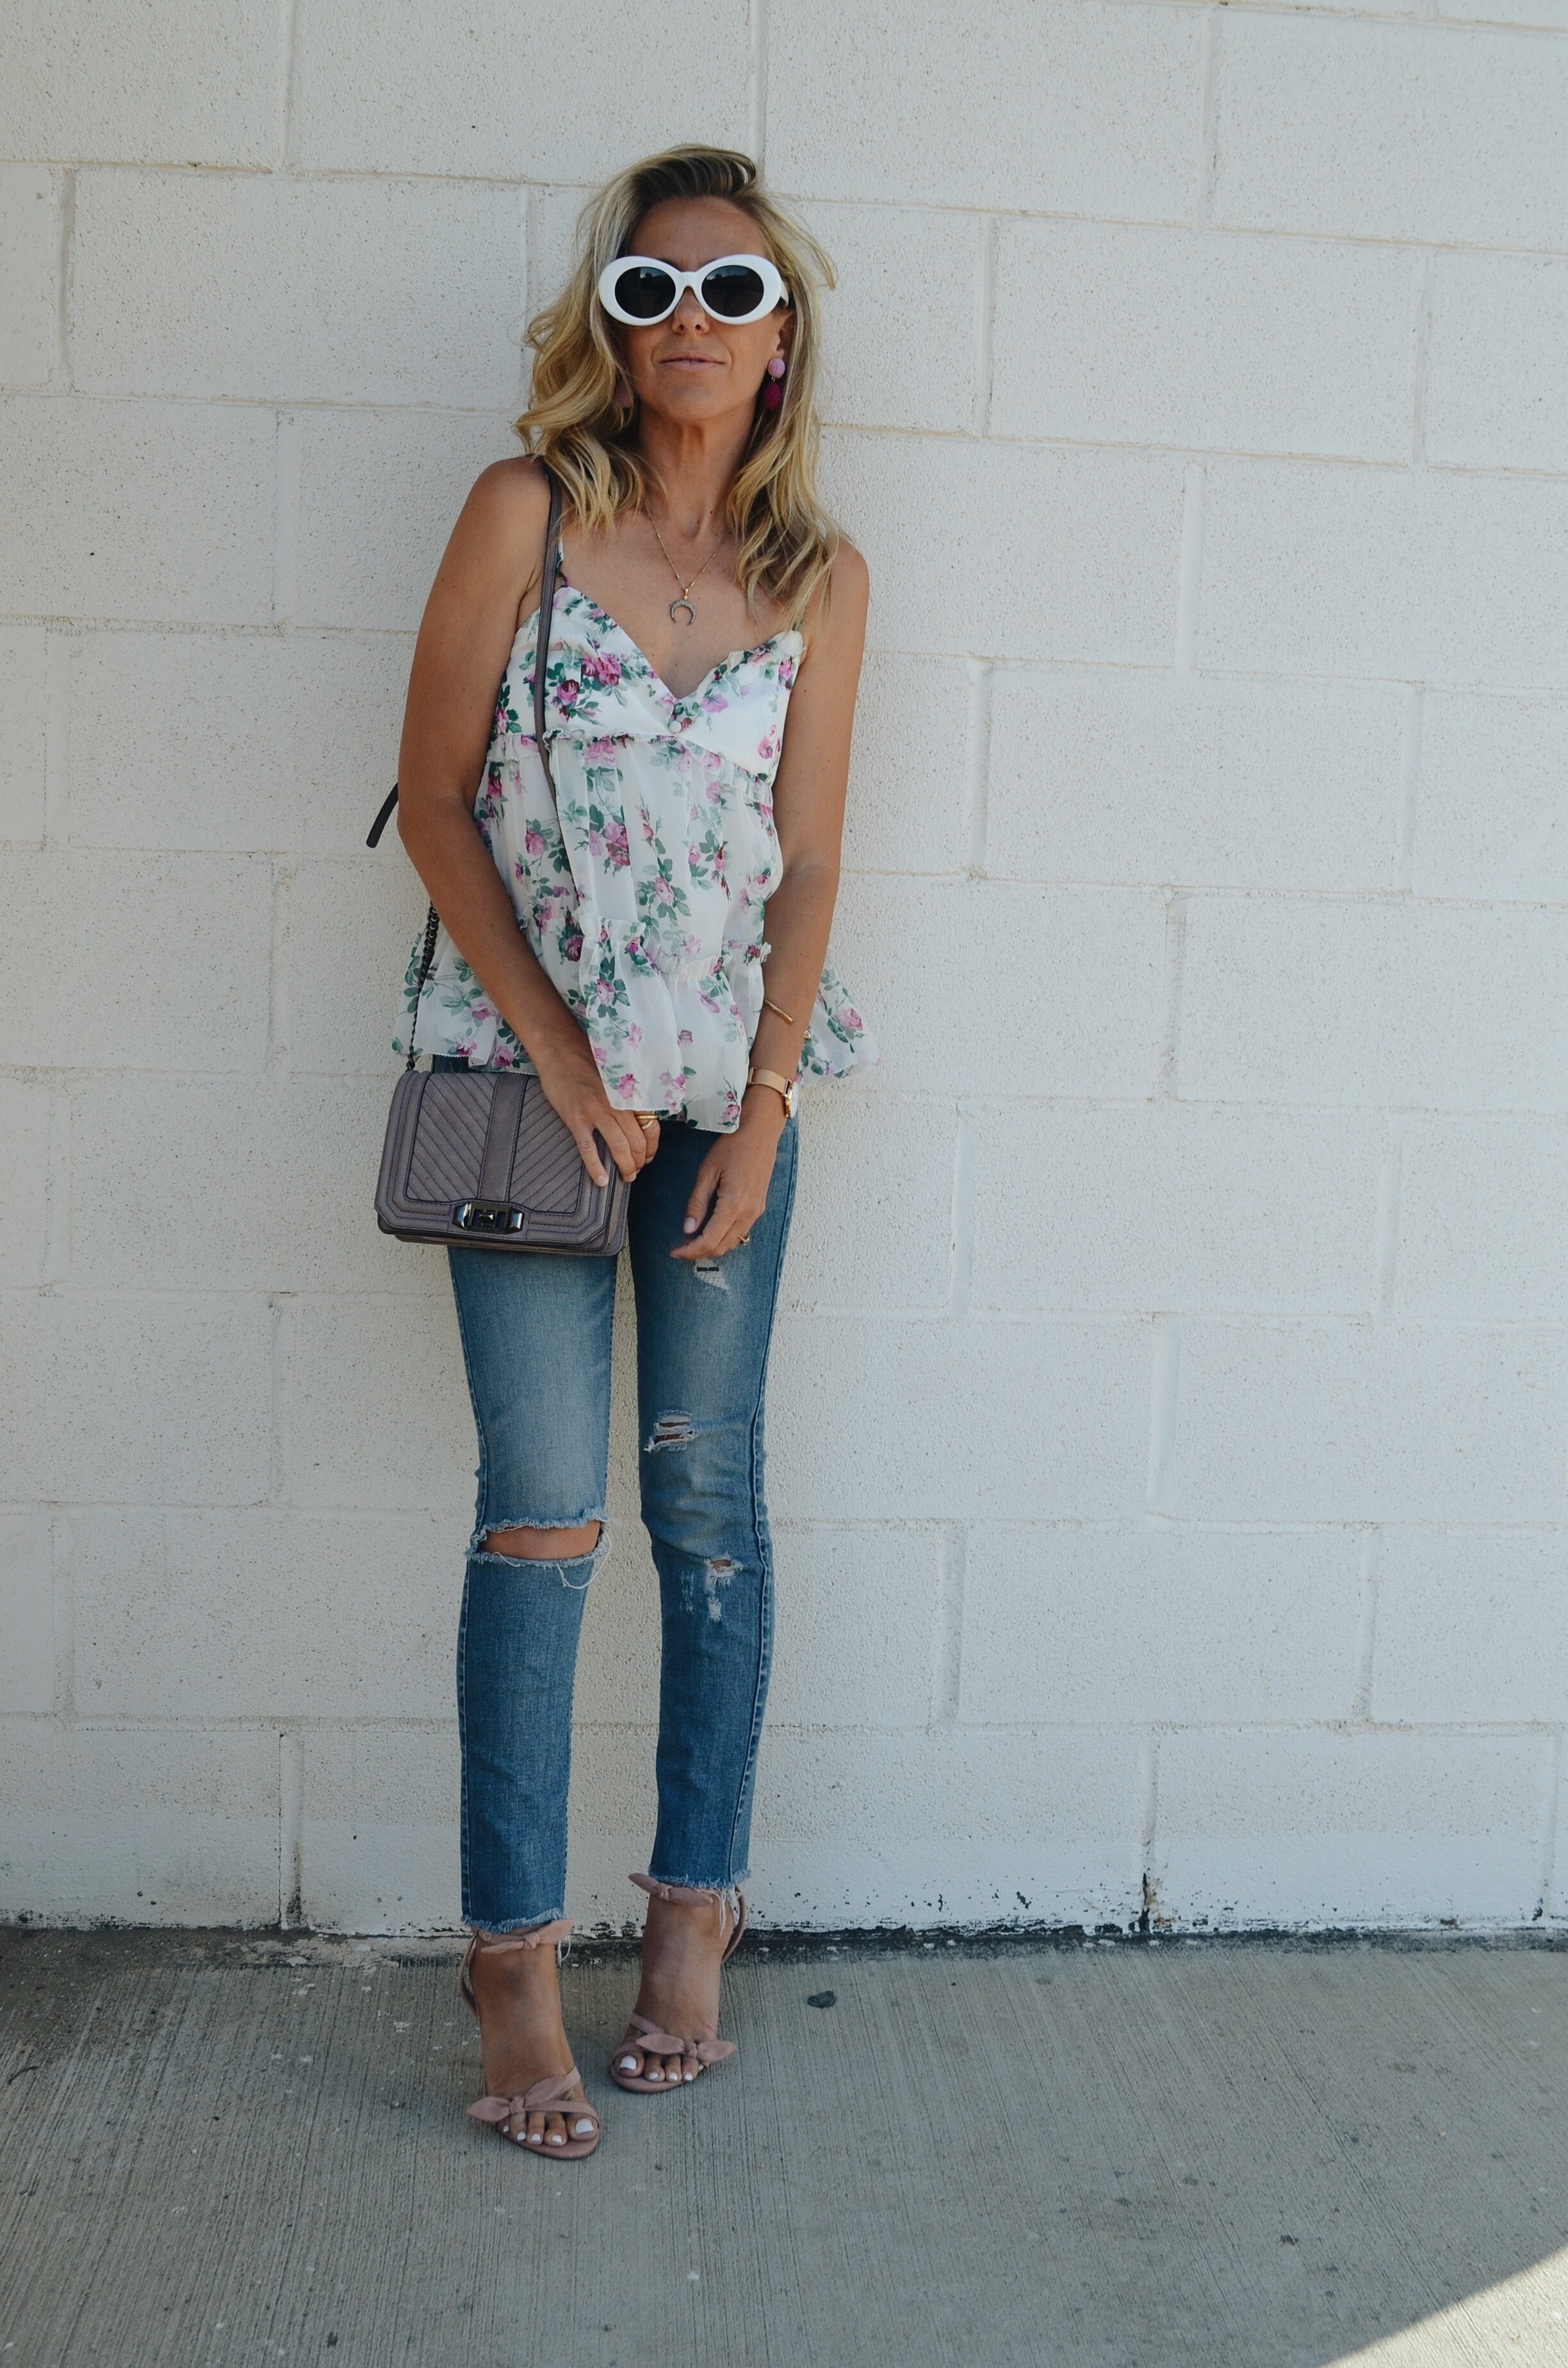 HOW TO DRESS UP DISTRESSED DENIM- Jaclyn De Leon Style + FLORAL RUFFLE TOP + A&F + DESTROYED JEANS +PINK HEELS + TARGET STYLE + SUMMER NIGHT OUTFIT + STREET STYLE + REBECCA MINKOFF HANDBAG + RETRO STYLE SUNGLASSES